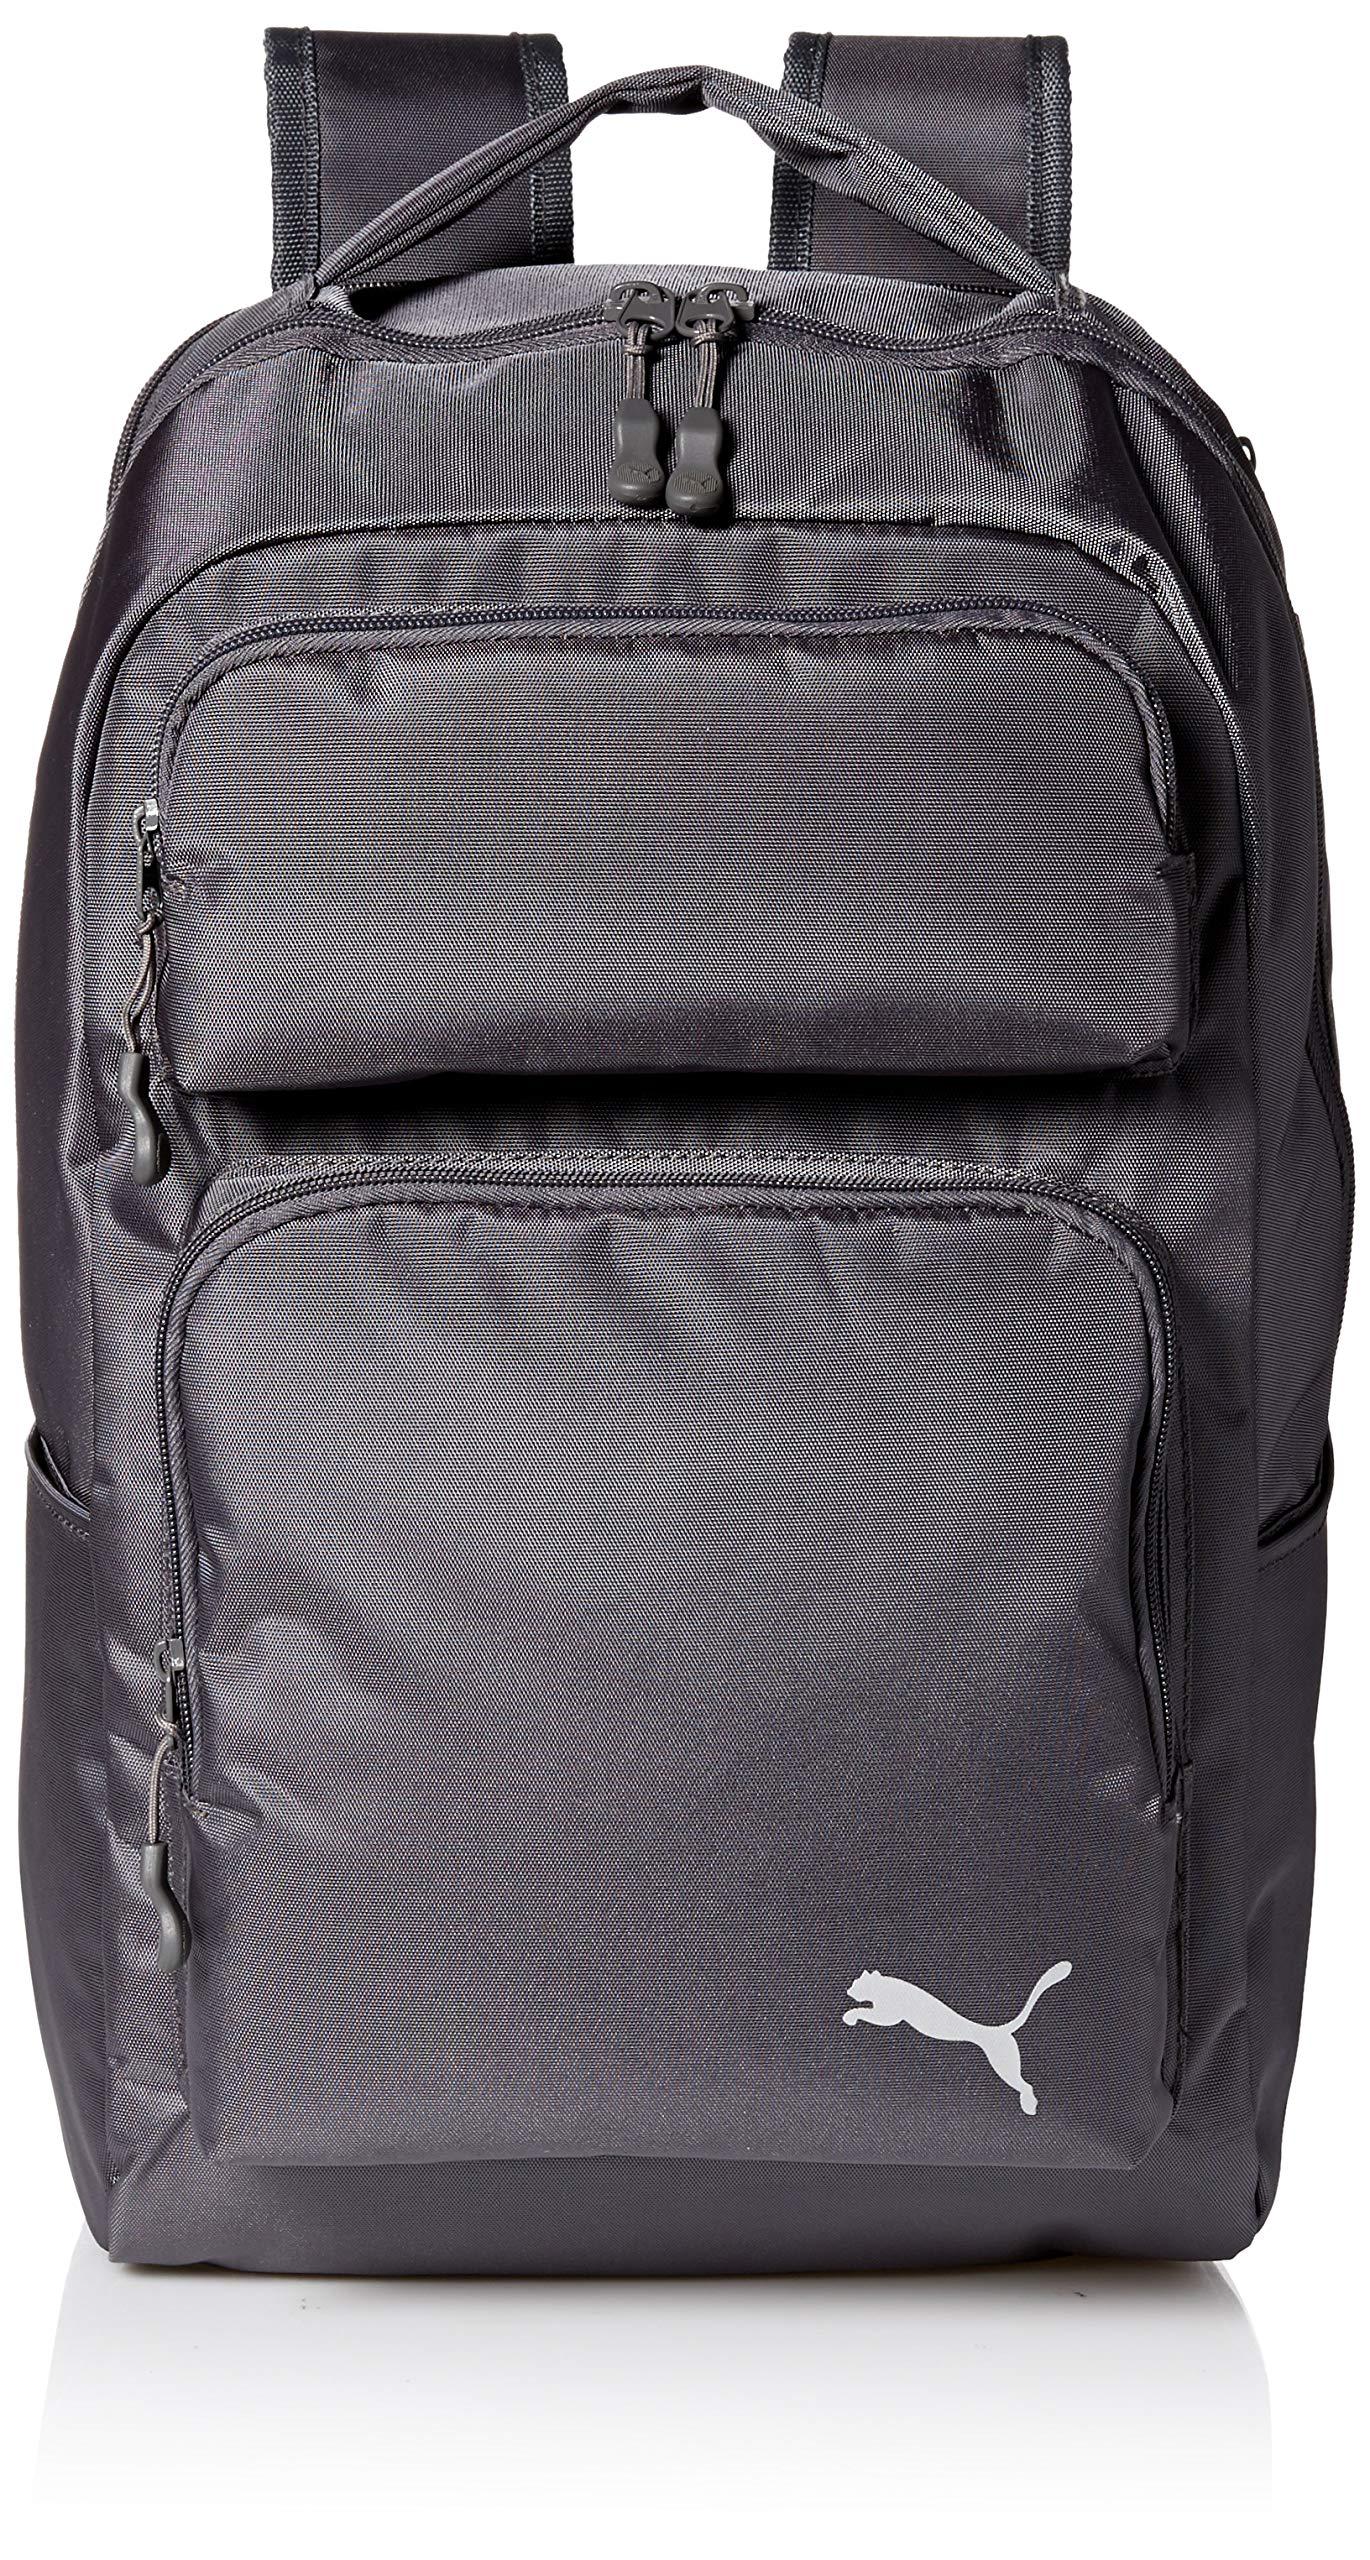 PUMA Aesthetic Backpack in Charcoal (Gray) for Men - Save 41% - Lyst